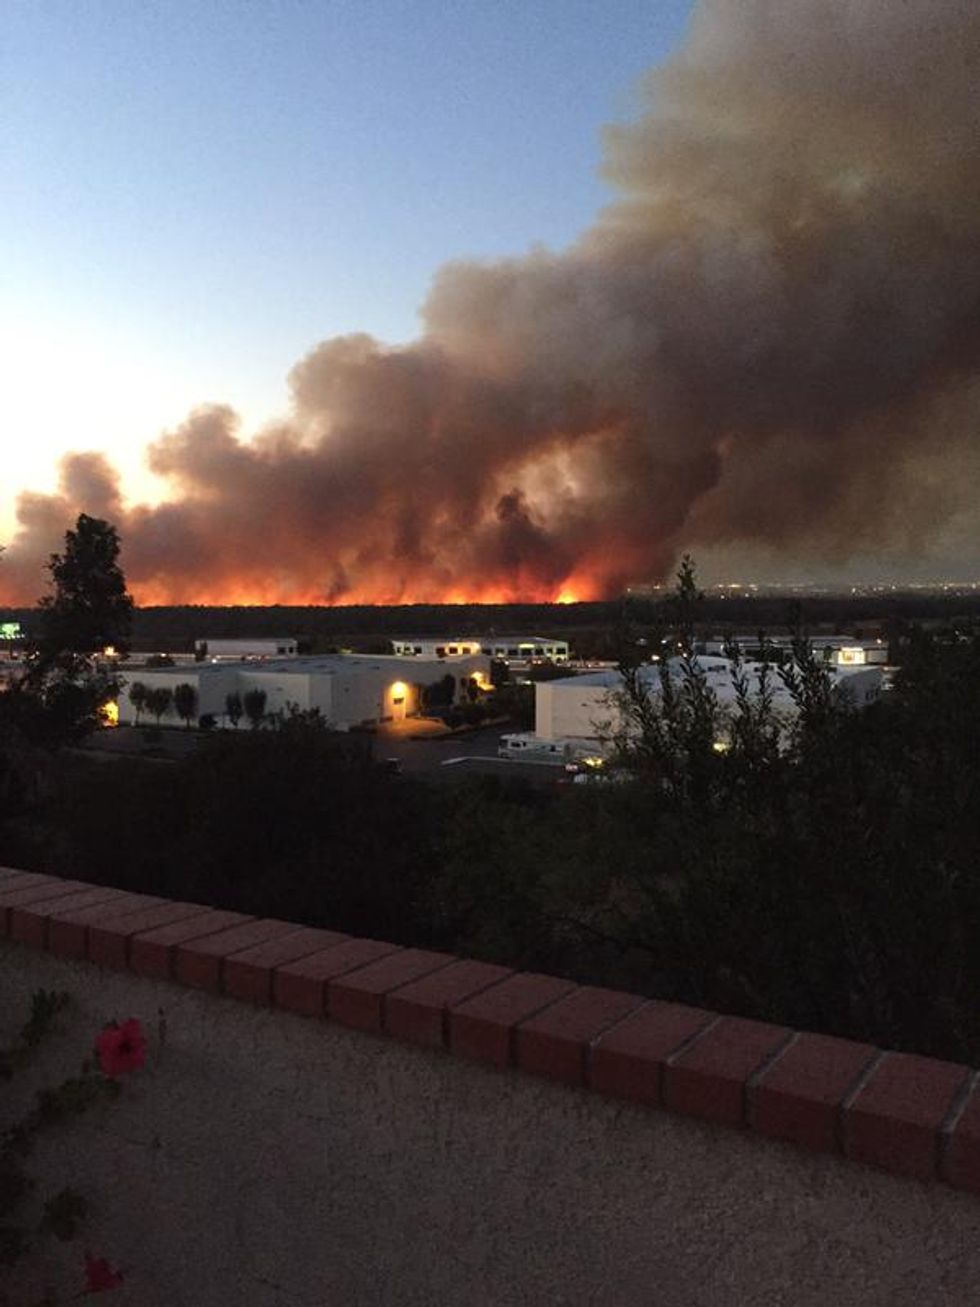 My City Is on Fire': Hundreds of Homes Evacuated as Southern California Inferno Rages